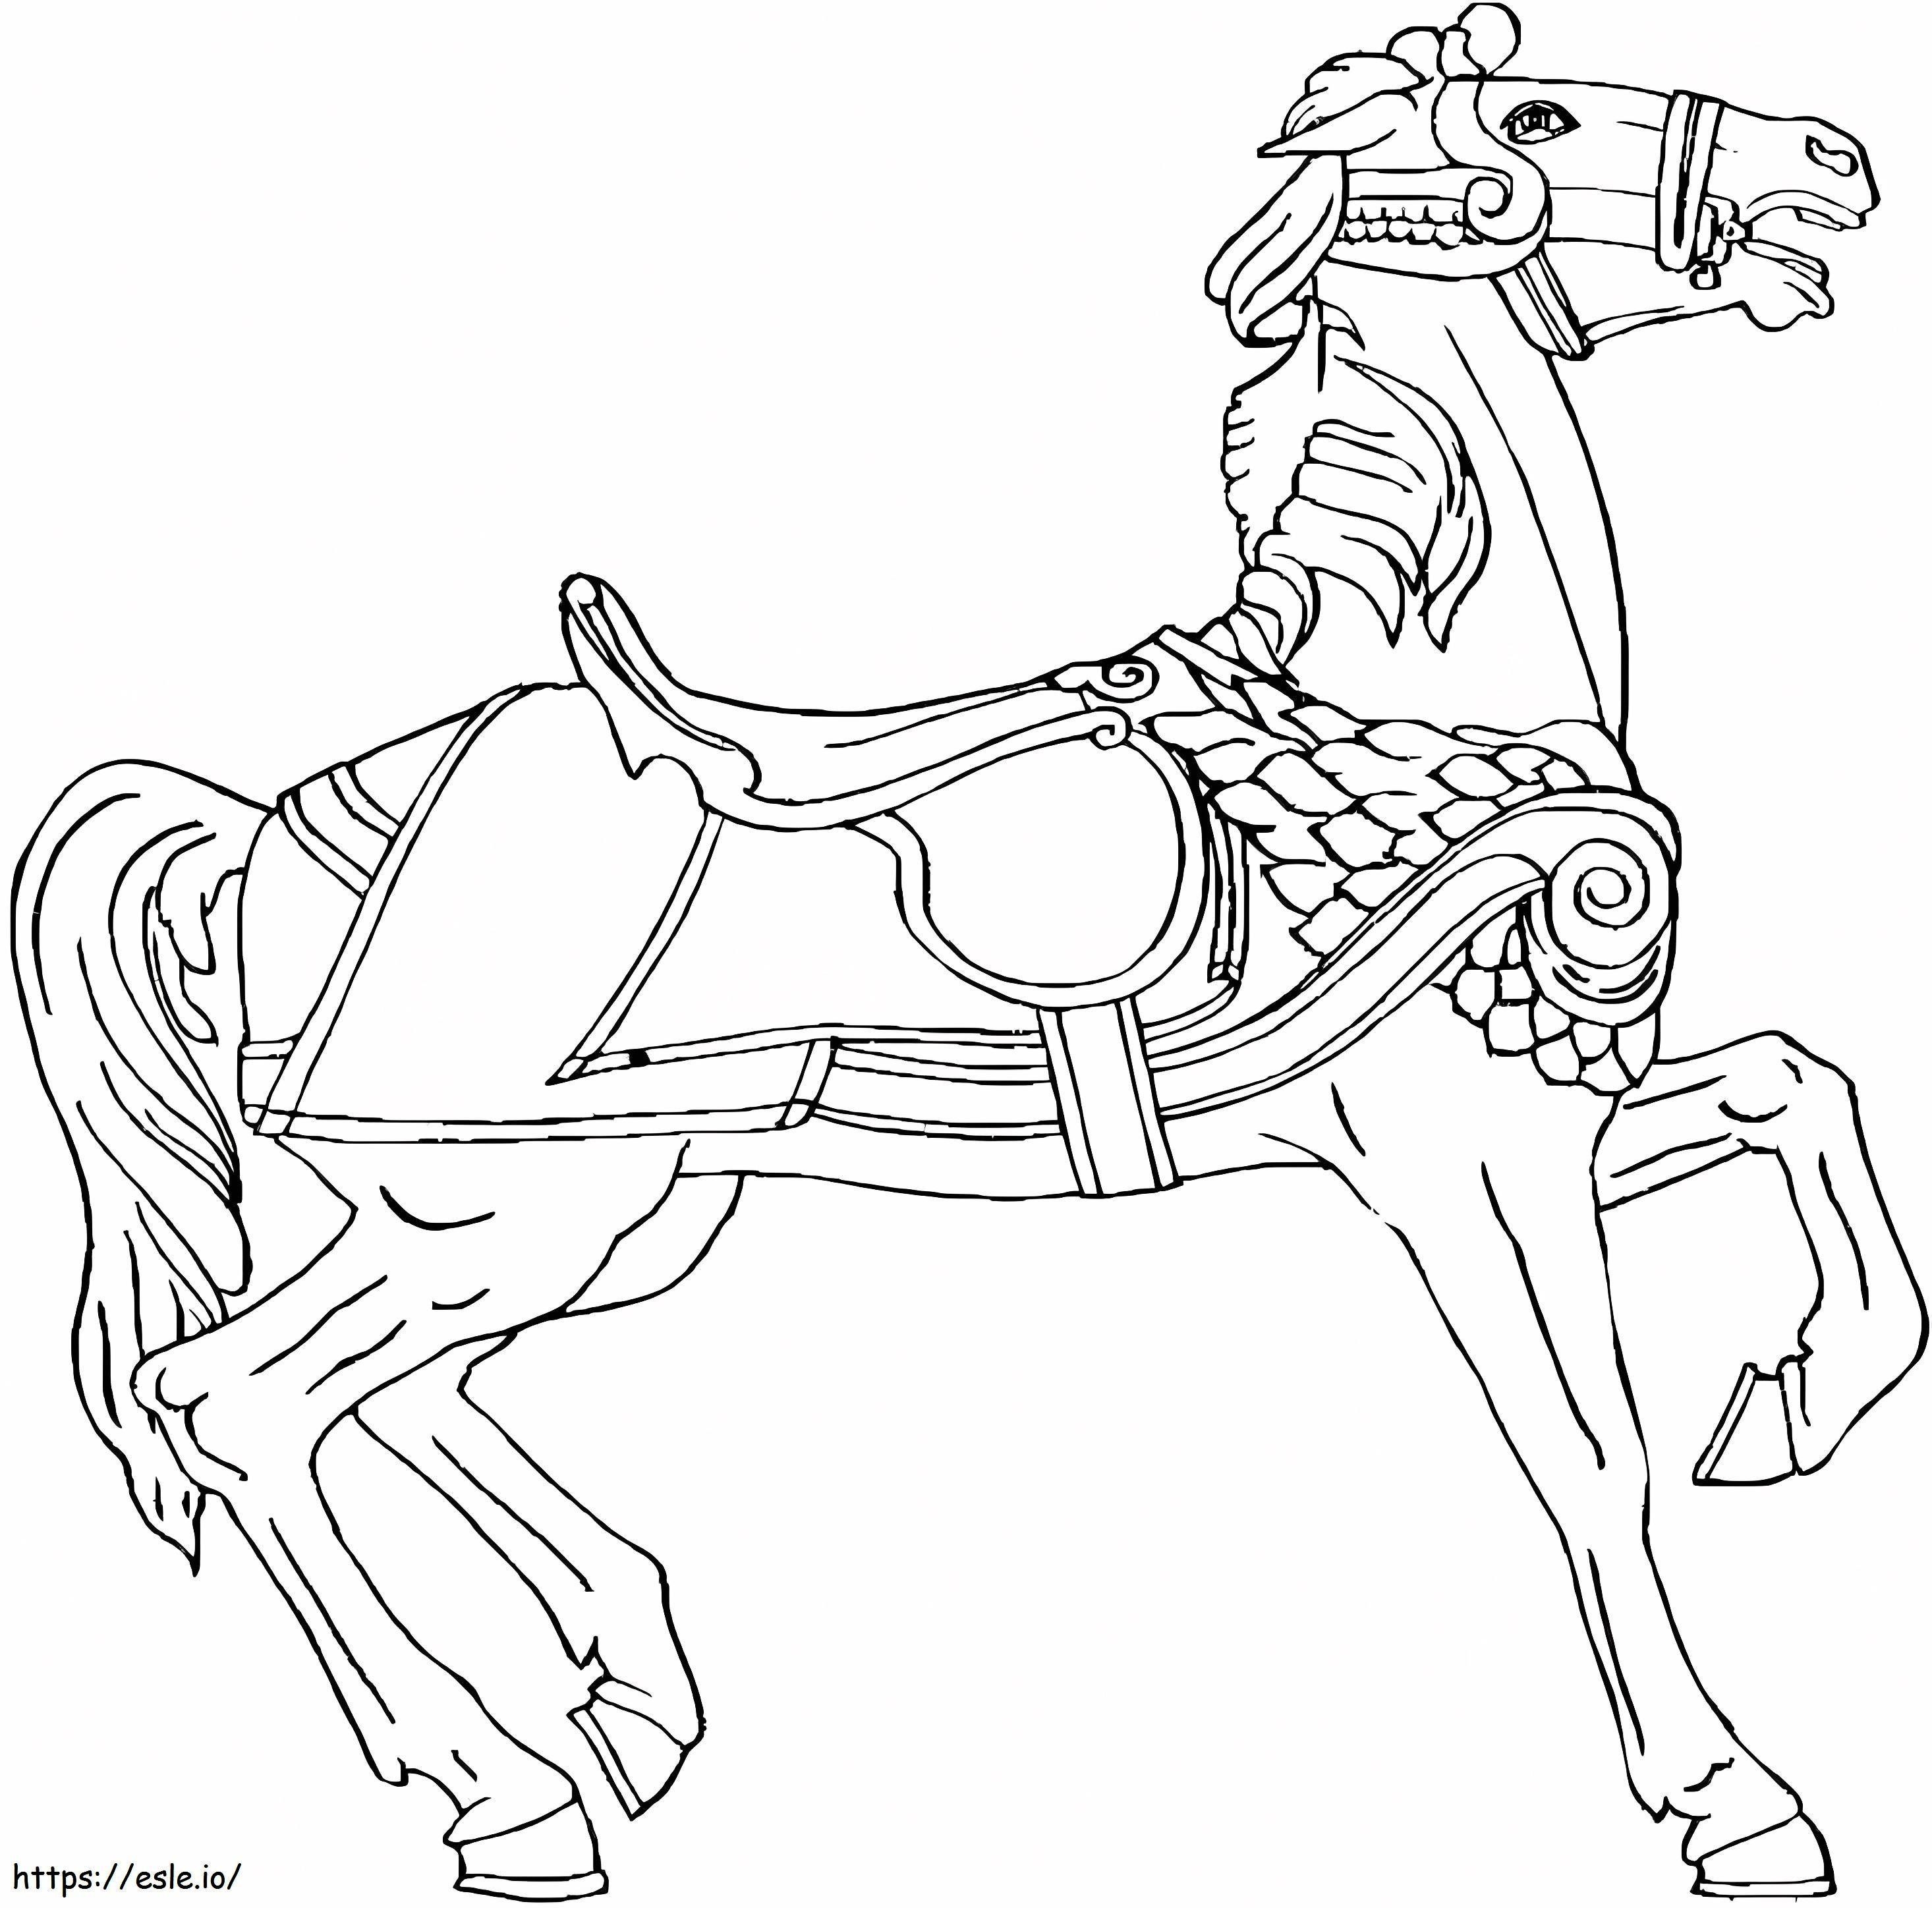 Carousel Horse 1 coloring page